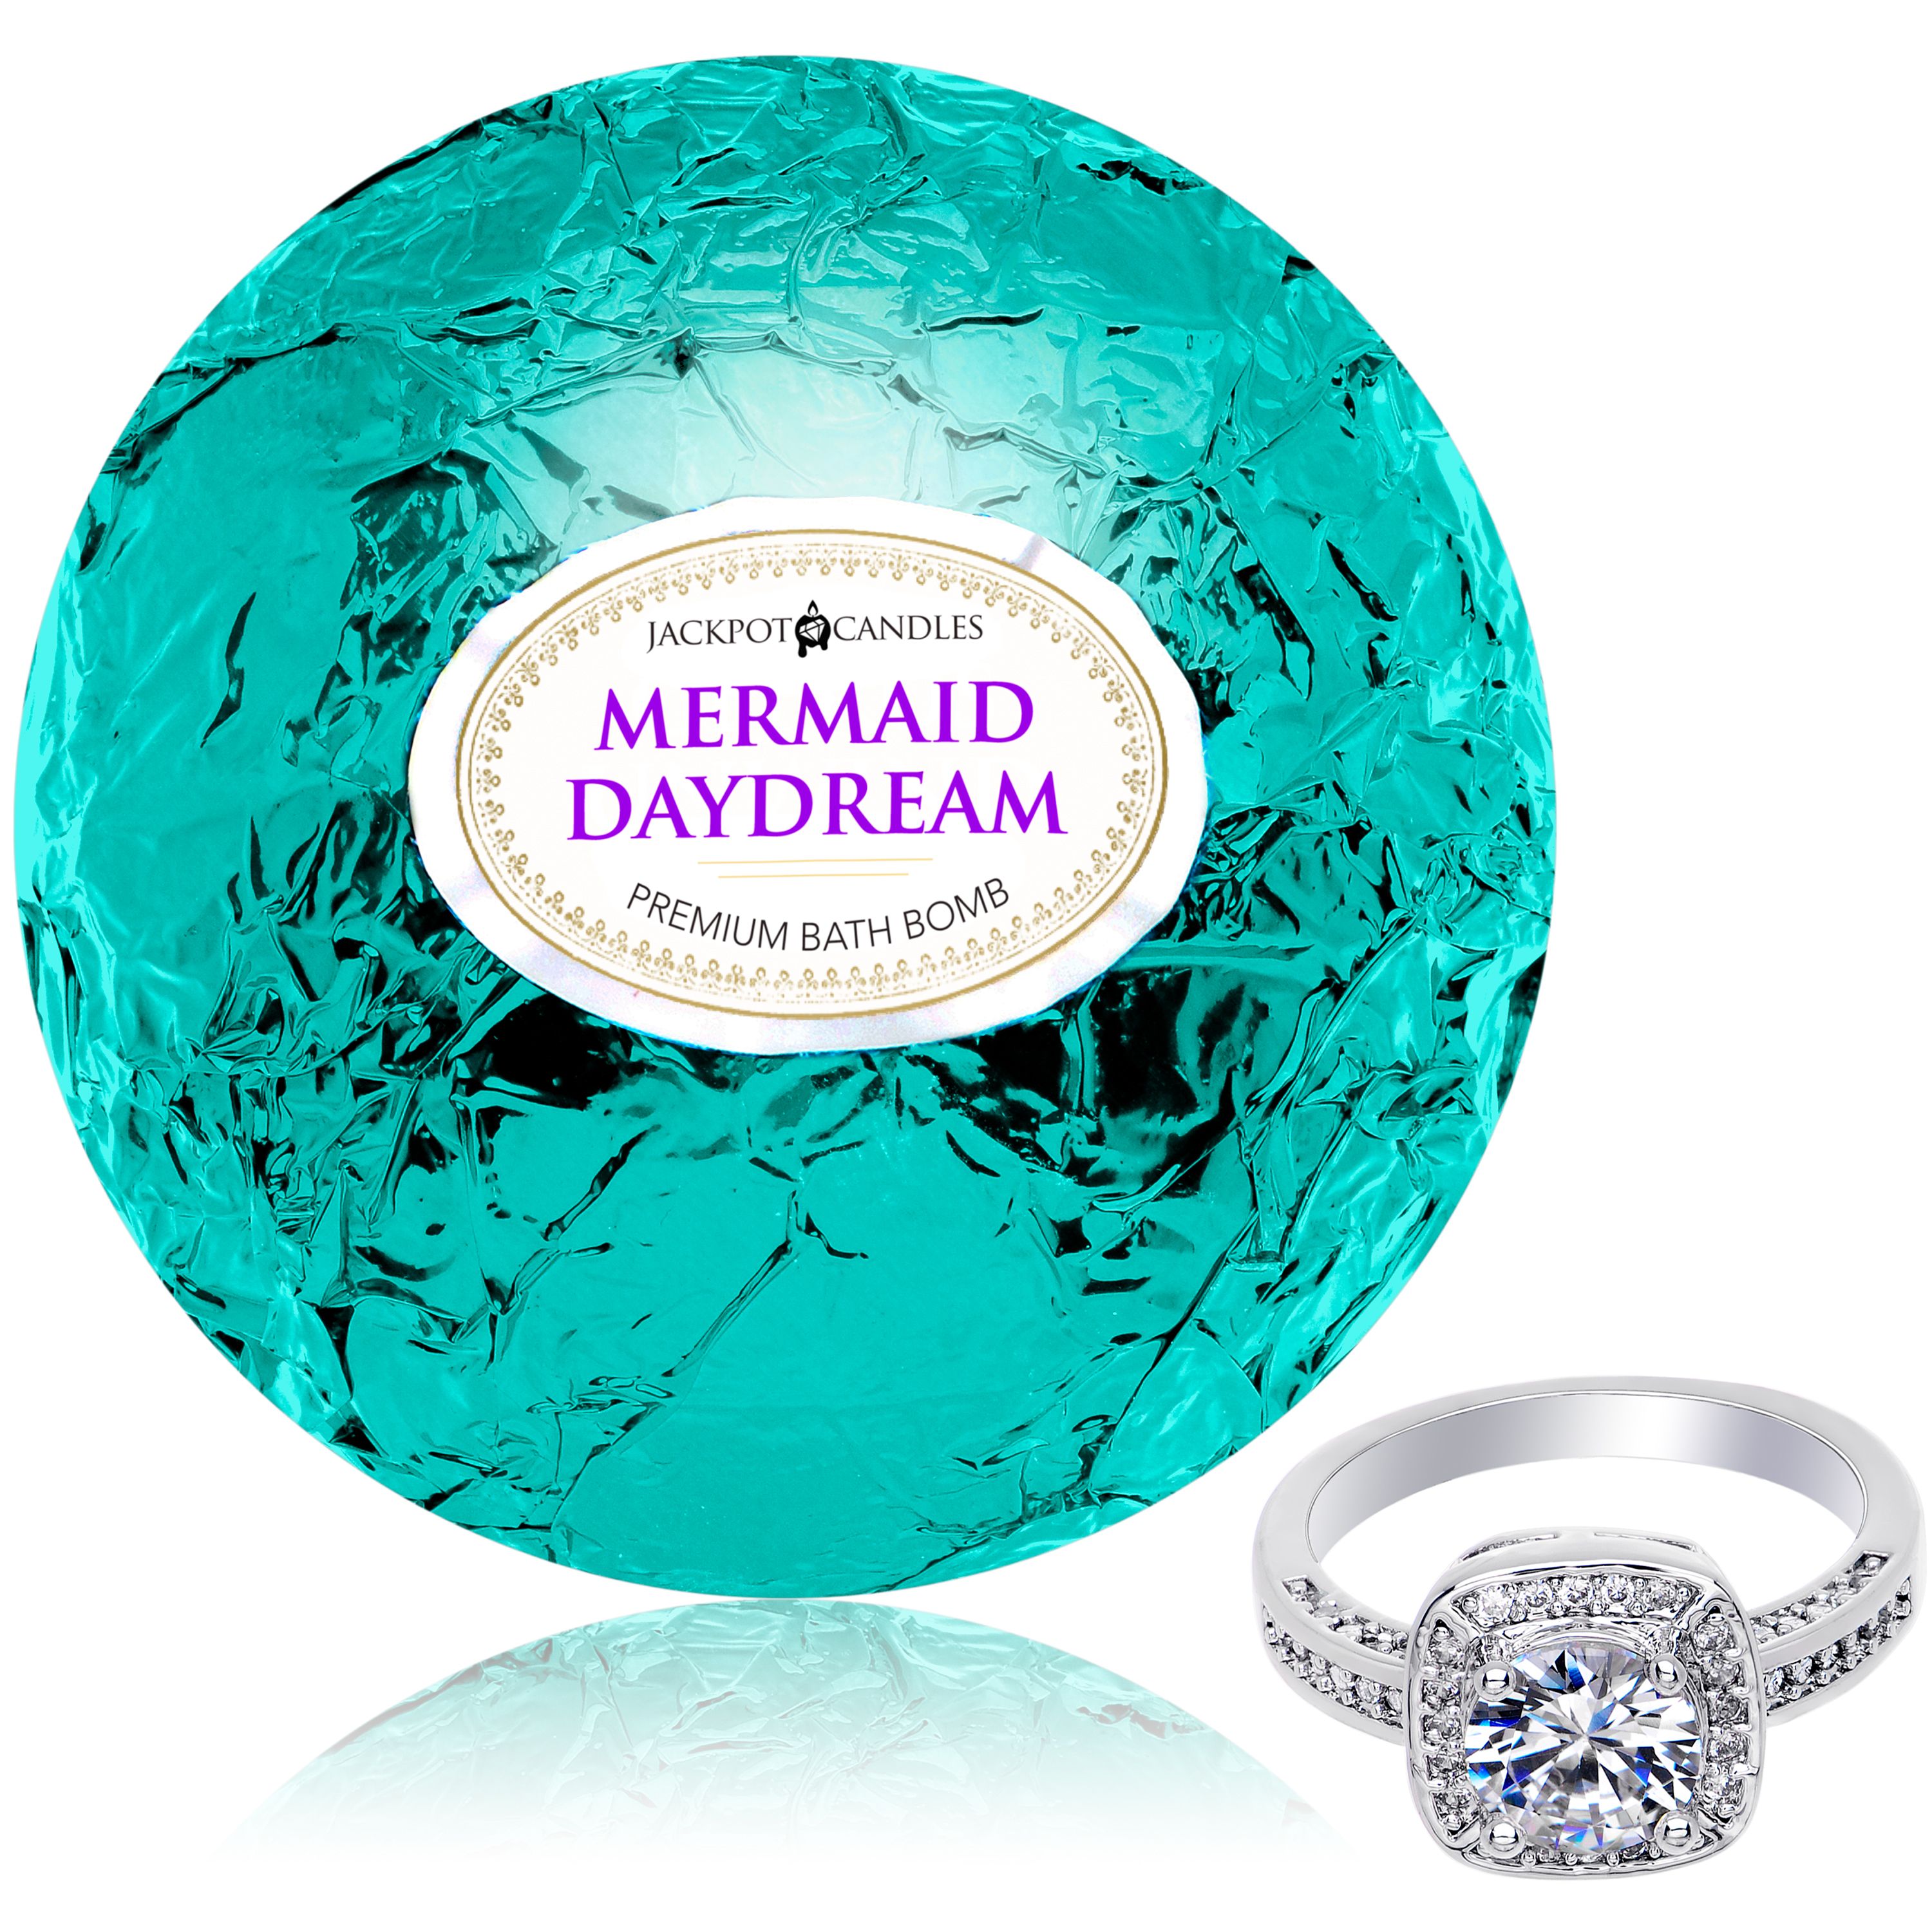 Jackpot Candles Bath Bomb with Ring Surprise Inside Mermaid Daydream Extra Large Made in USA - image 1 of 9